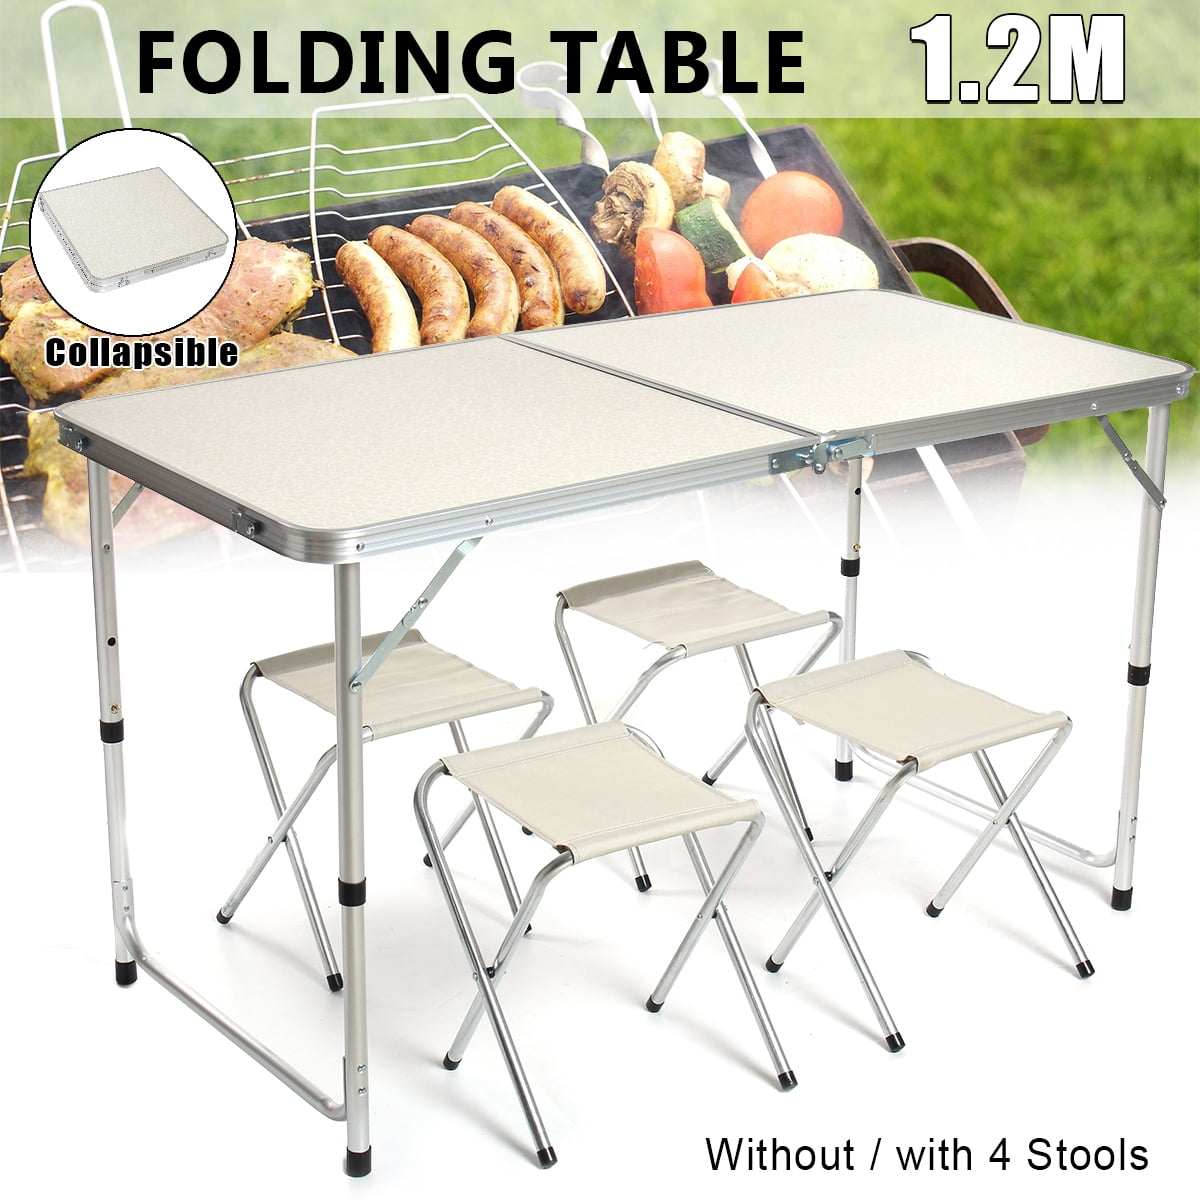 Folding Table Portable Outdoor Picnic Party Dining Camp Tables Easytake Chair 